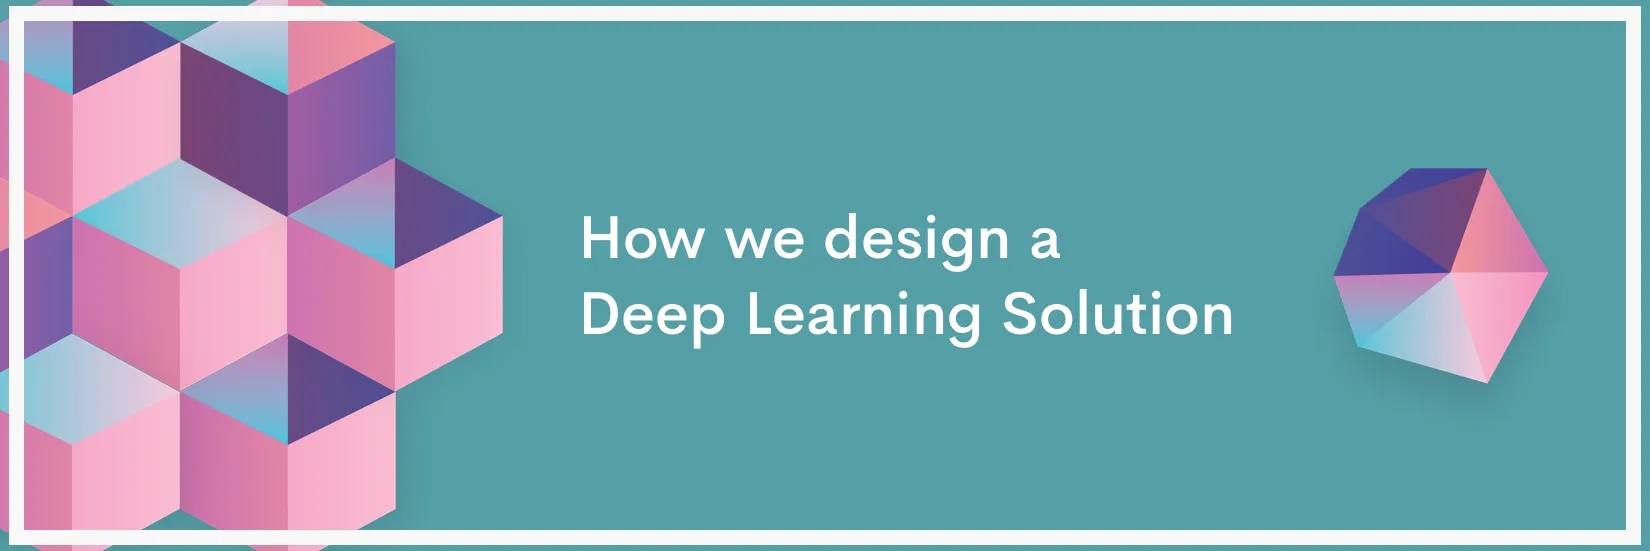 Deep Learning 101: How we design a Deep Learning Solution